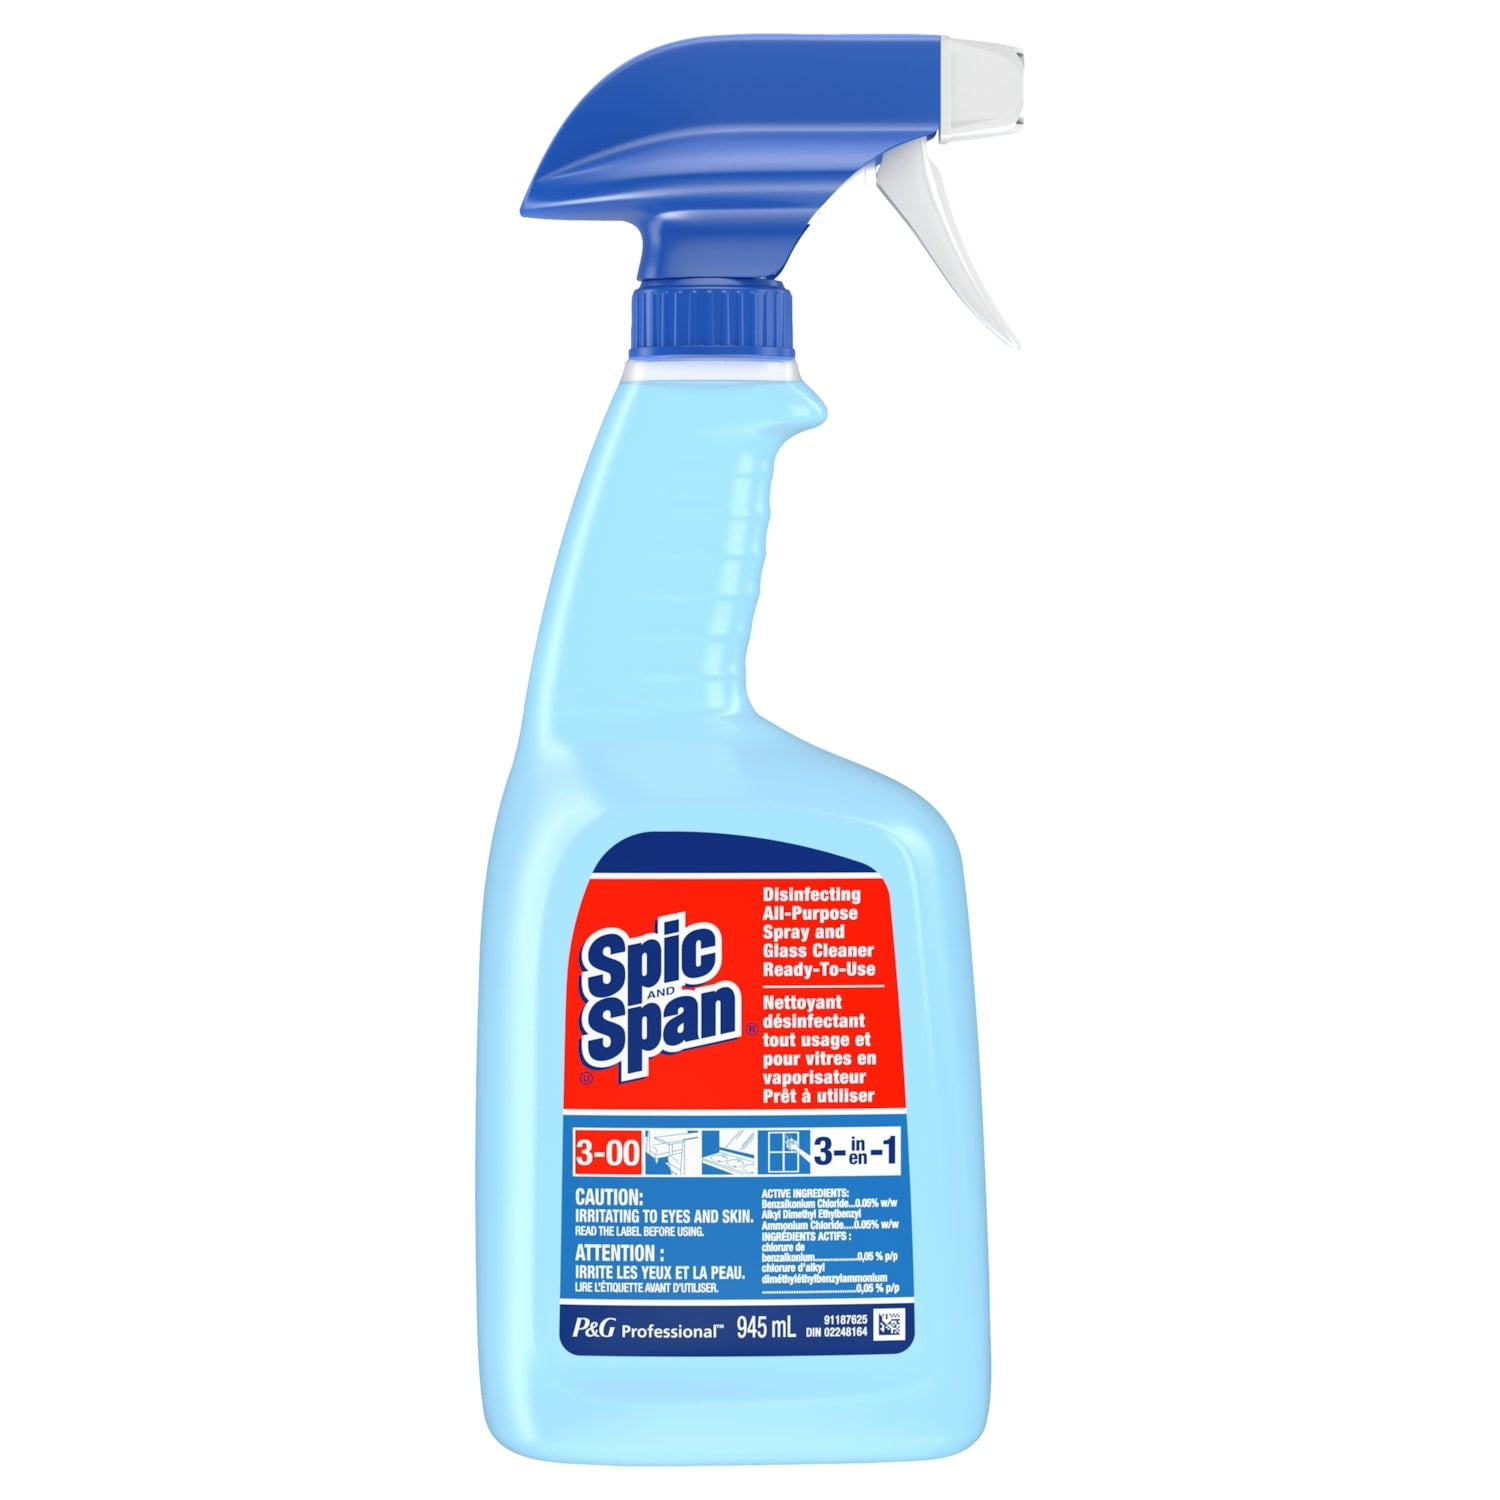 Spic & Span 3-In-1 All Purpose Disinfectant Ready To Use Cleaner - 945 ml - Case of 8